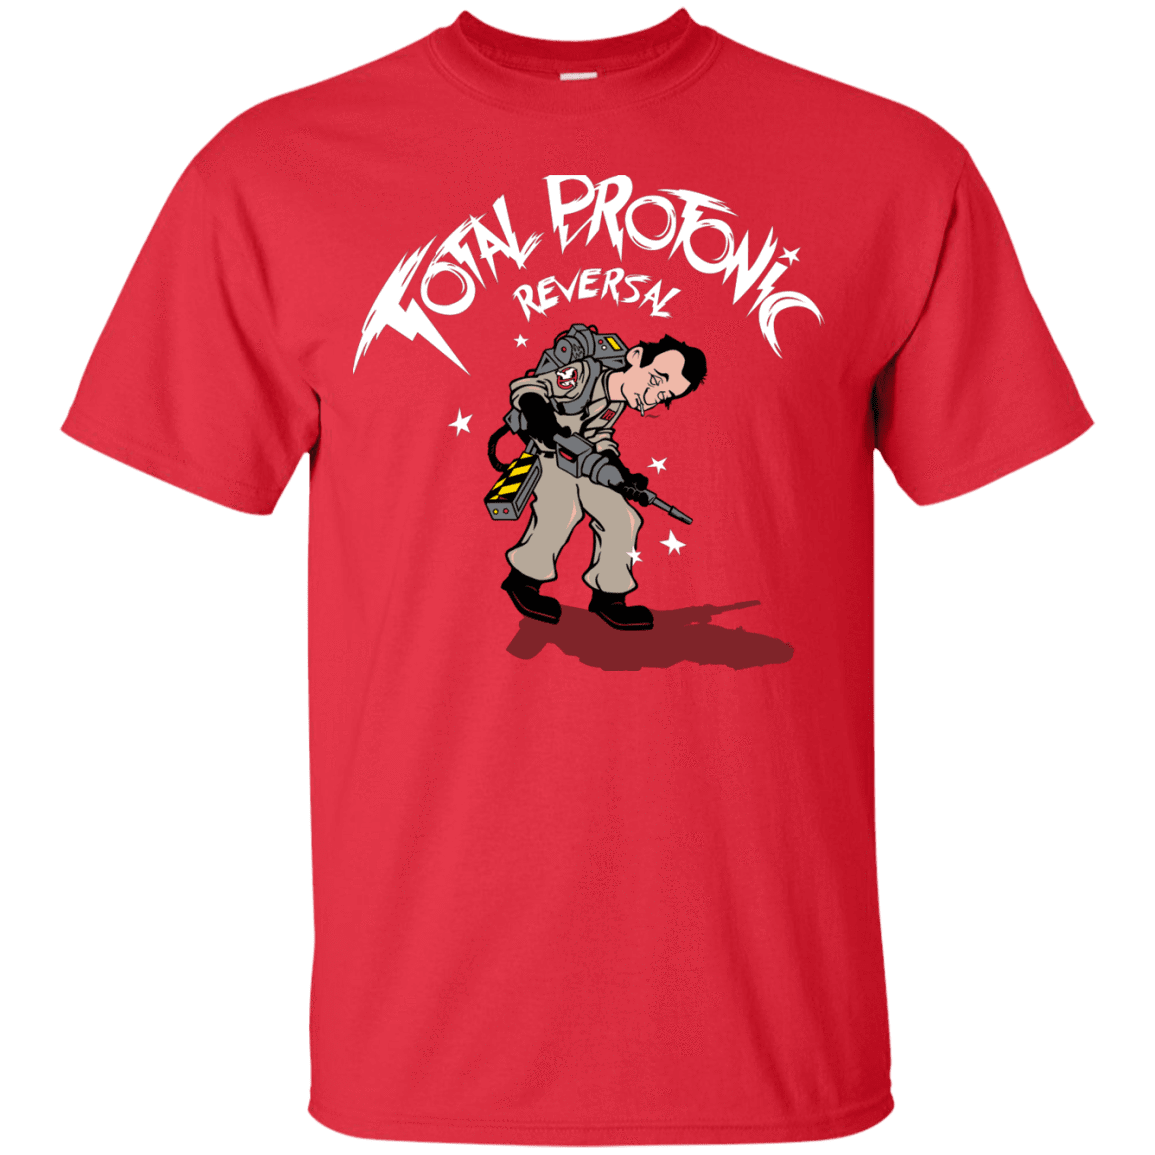 T-Shirts Red / Small Total Protonic Reversal T-Shirt